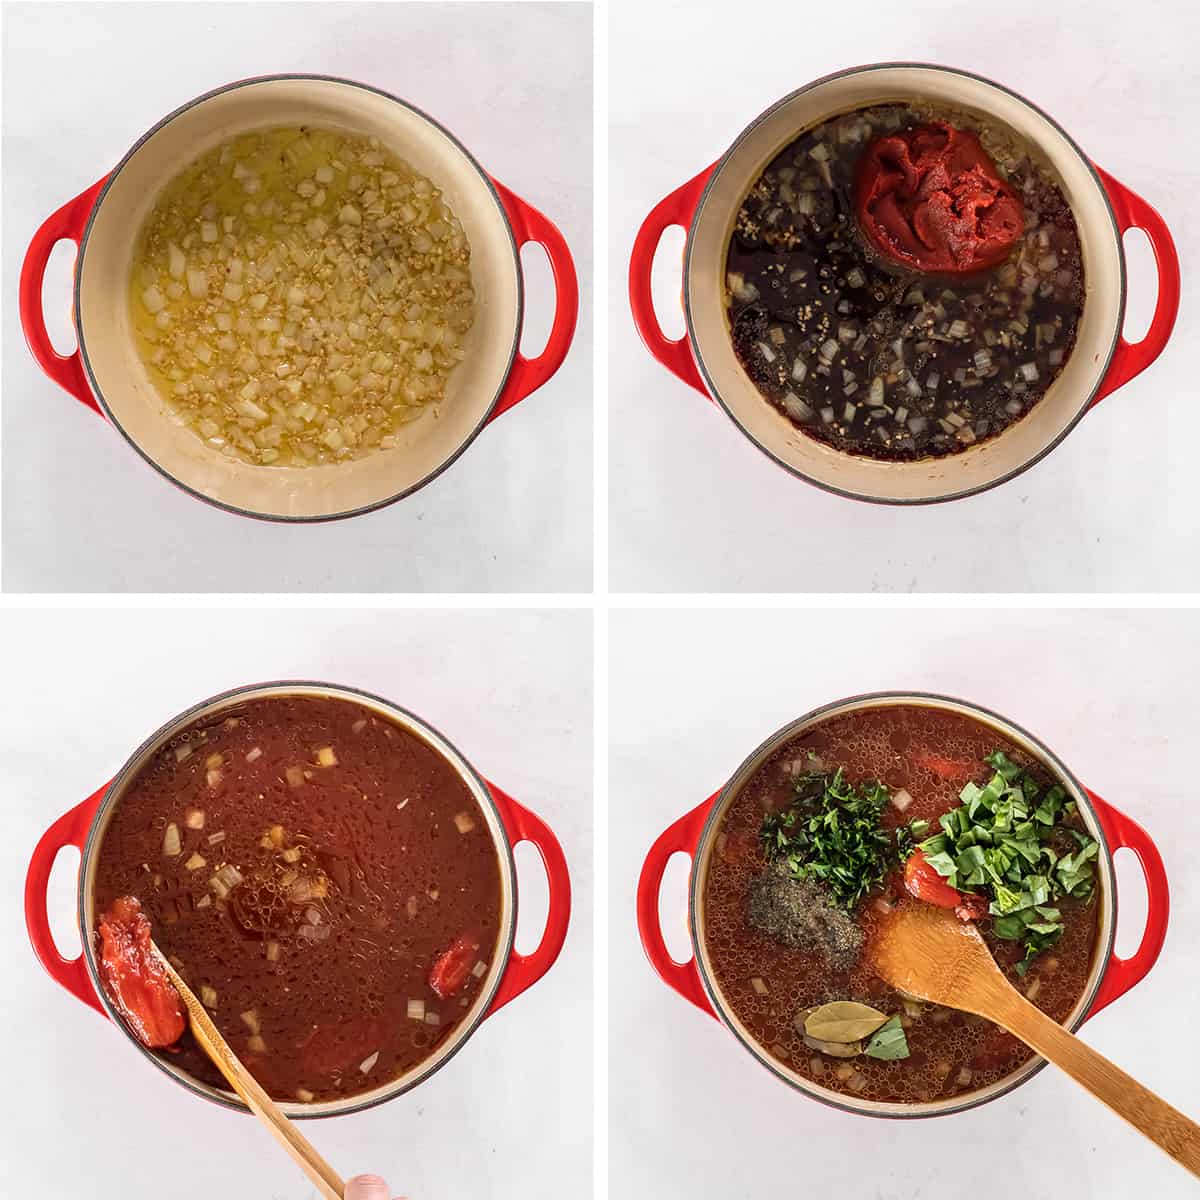 Four images of ingredients for homemade spaghetti sauce being combined in a Dutch oven.